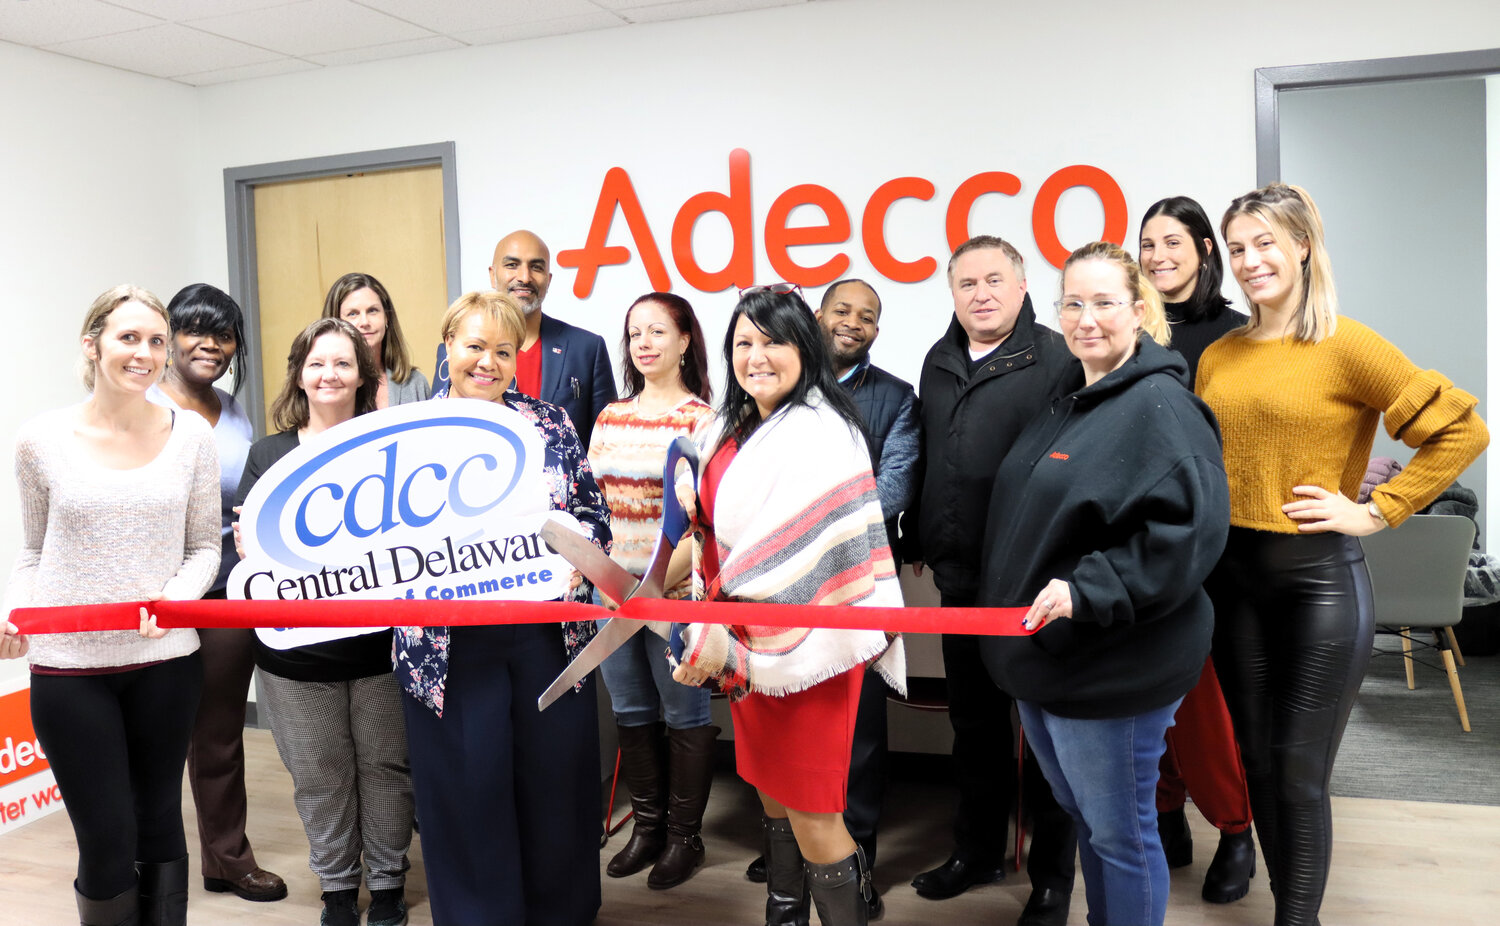 Central Delaware Chamber of Commerce members and friends joined Adecco Staffing Branch Manager Gigi Traynor and her team to celebrate the grand opening of the new location.